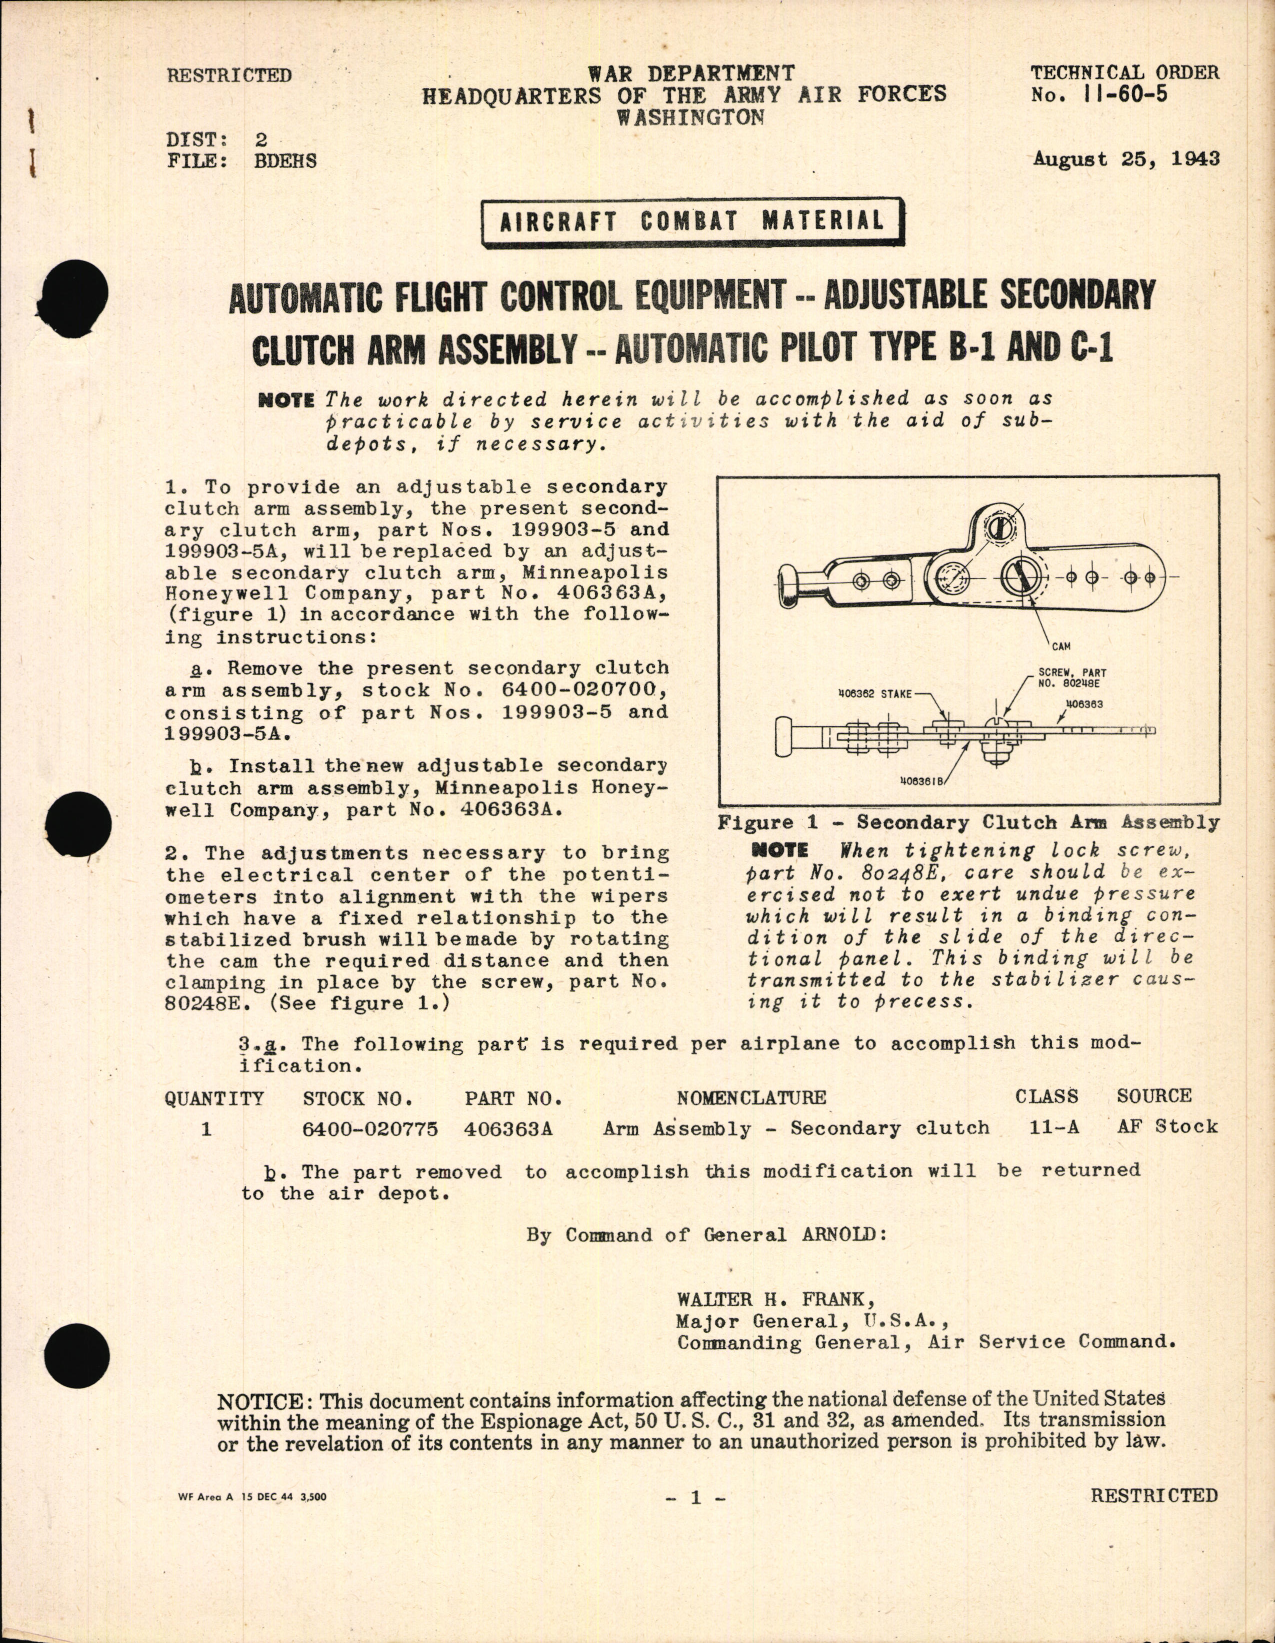 Sample page 1 from AirCorps Library document: Adjustable Secondary Clutch Arm Assembly for Automatic Pilot Type B-1 and C-1